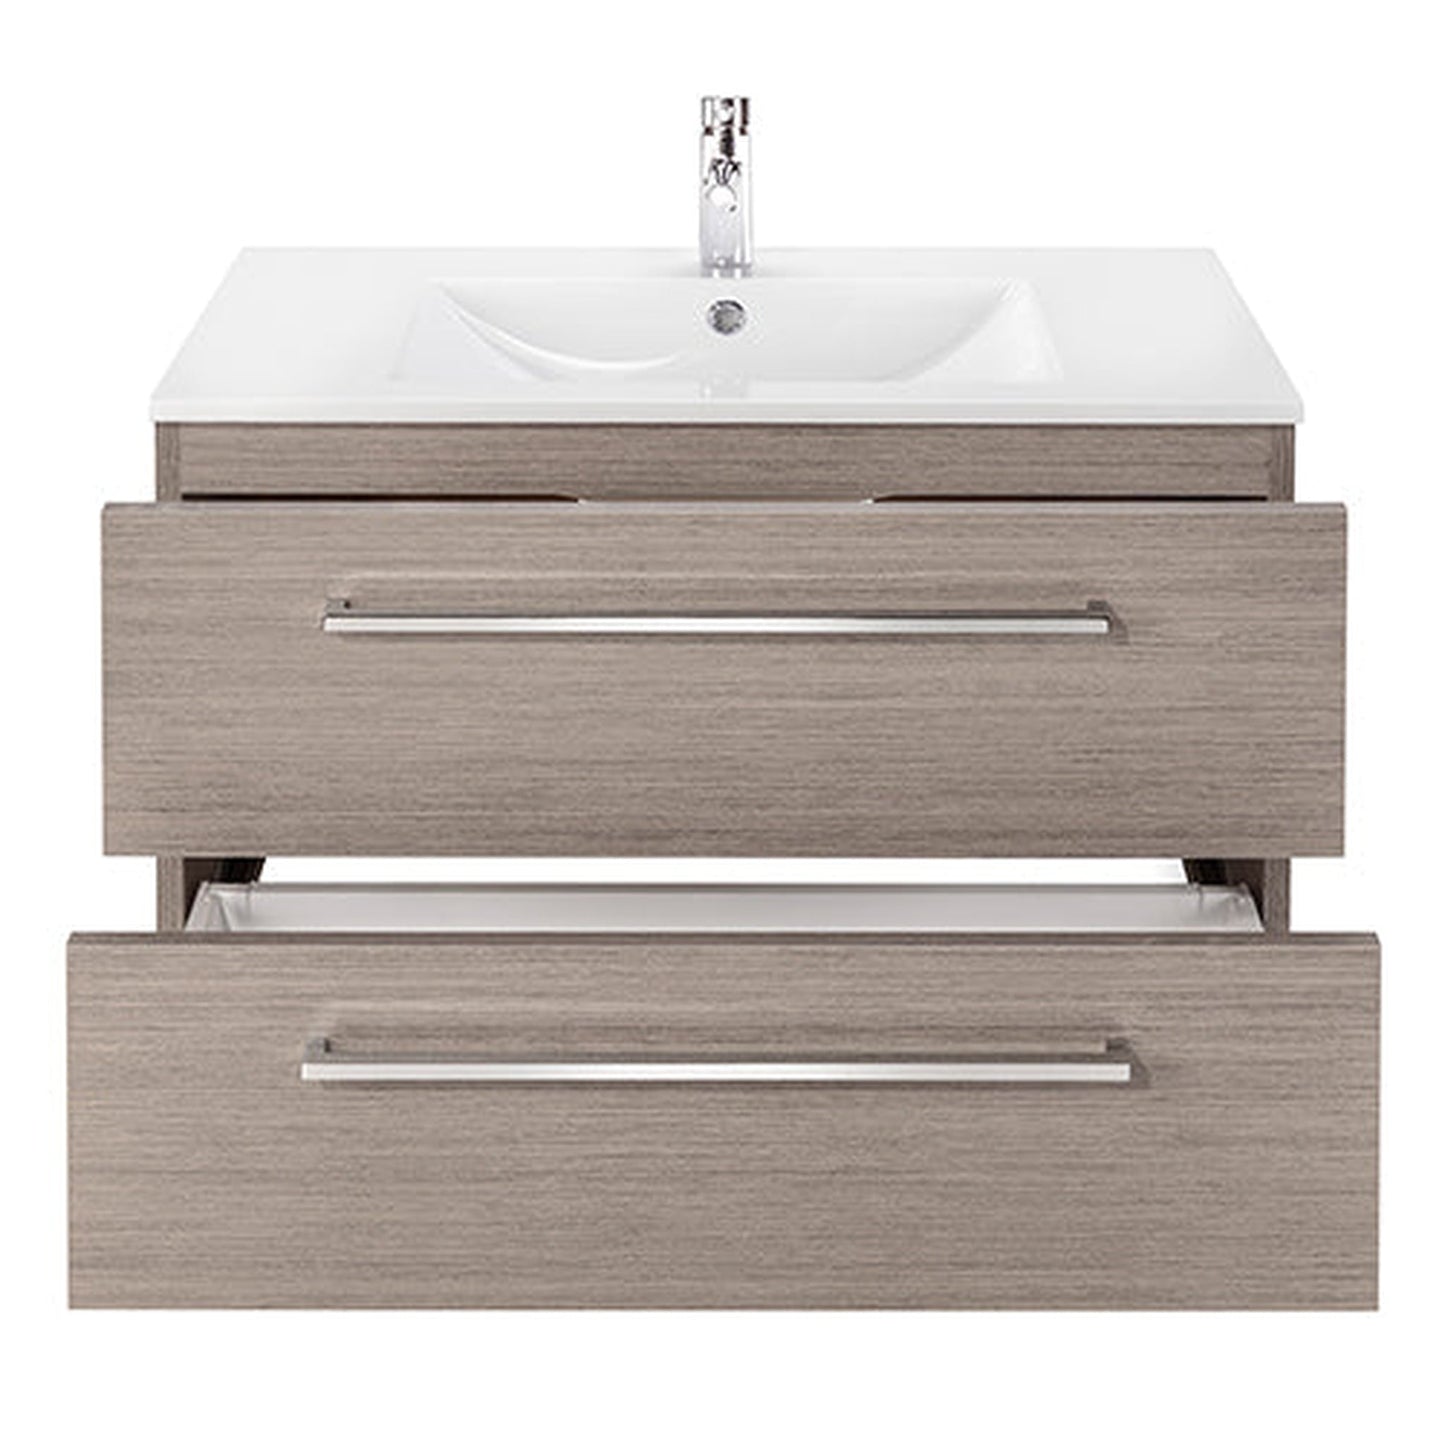 Abby Bath Aiden 36” x 20” Wall-Mounted Vanity in Slate Finish With Two Drawers and Chrome Handles